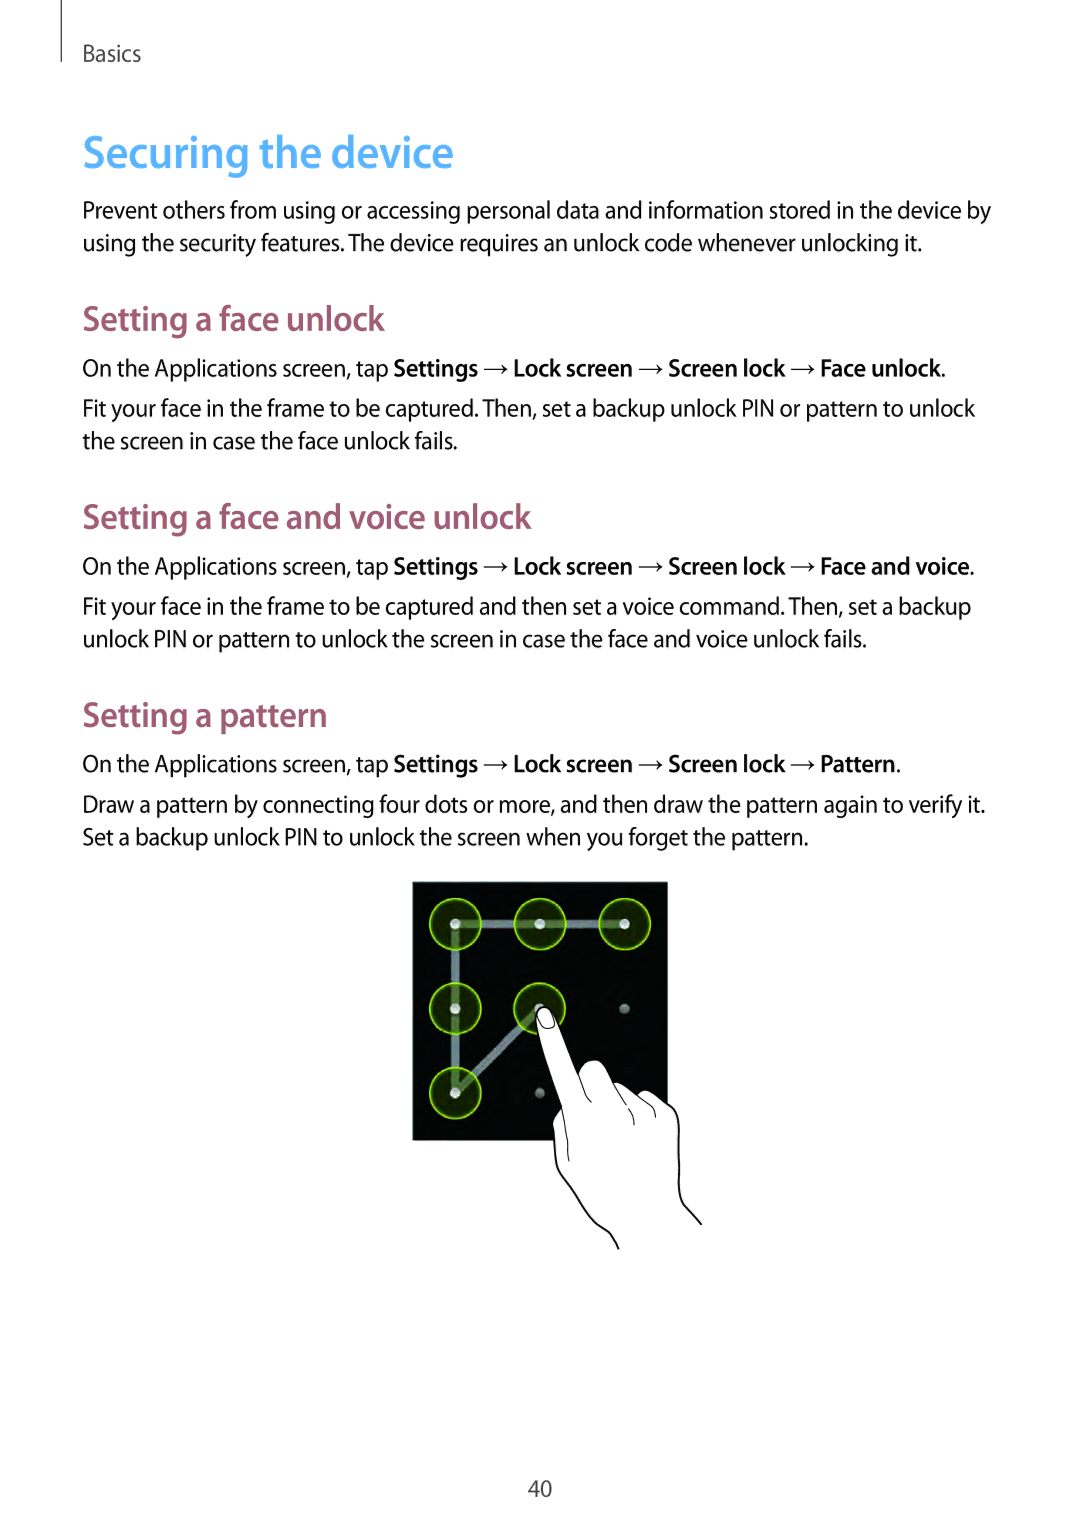 Samsung GT-I9082 user manual Securing the device, Setting a face unlock, Setting a face and voice unlock, Setting a pattern 